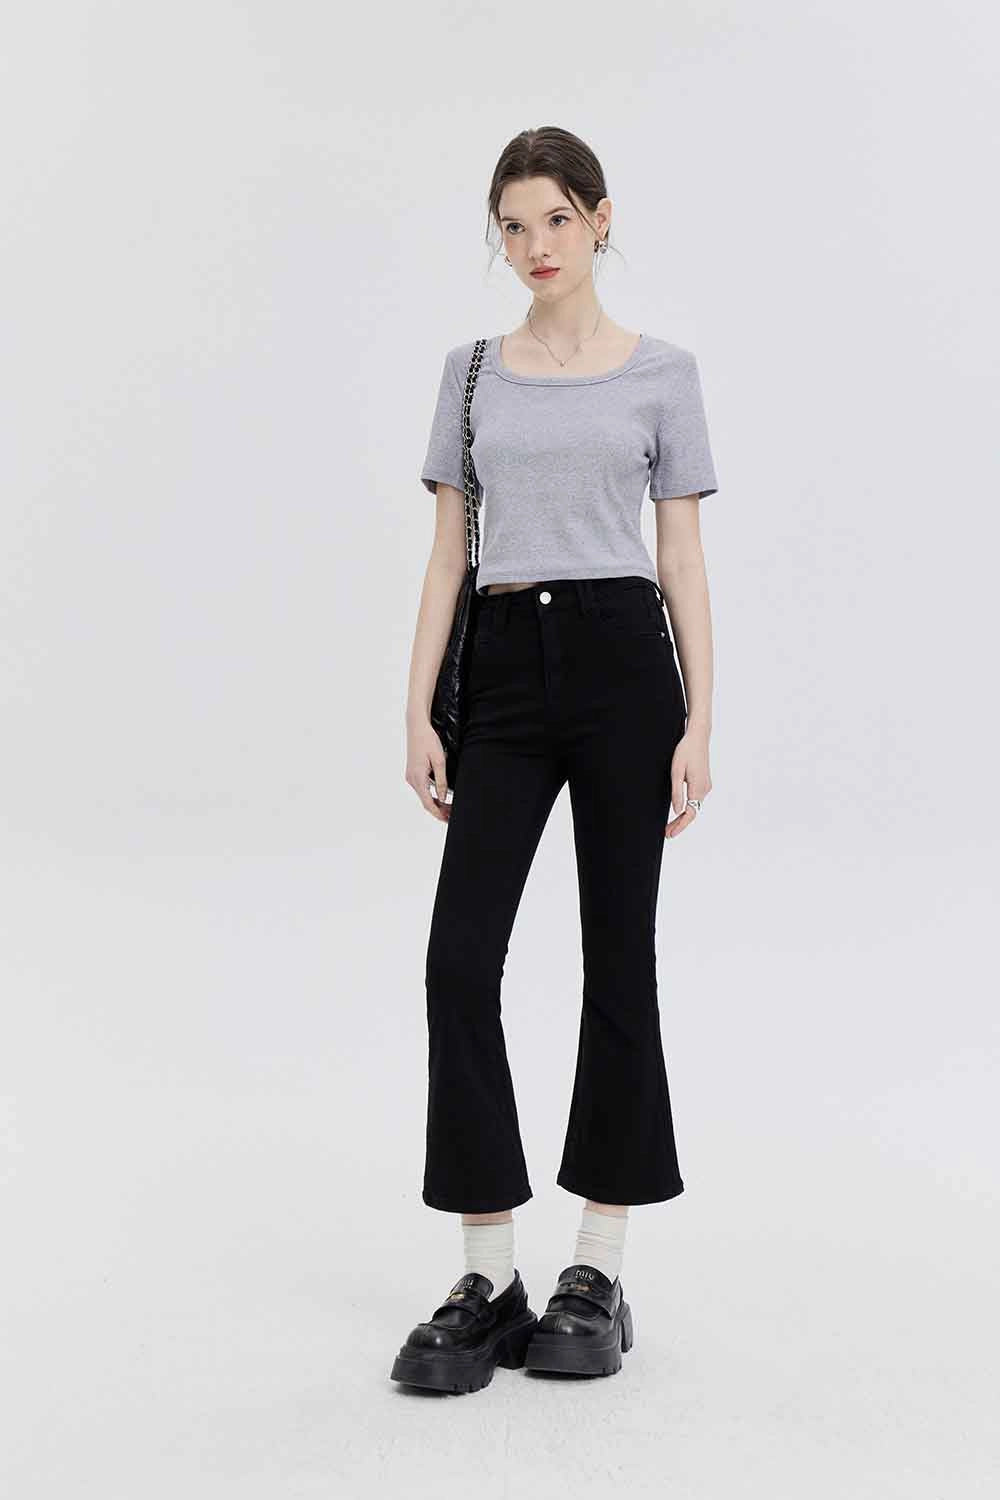 Flared Mid-Wash Jeans with Classic Five-Pocket Design